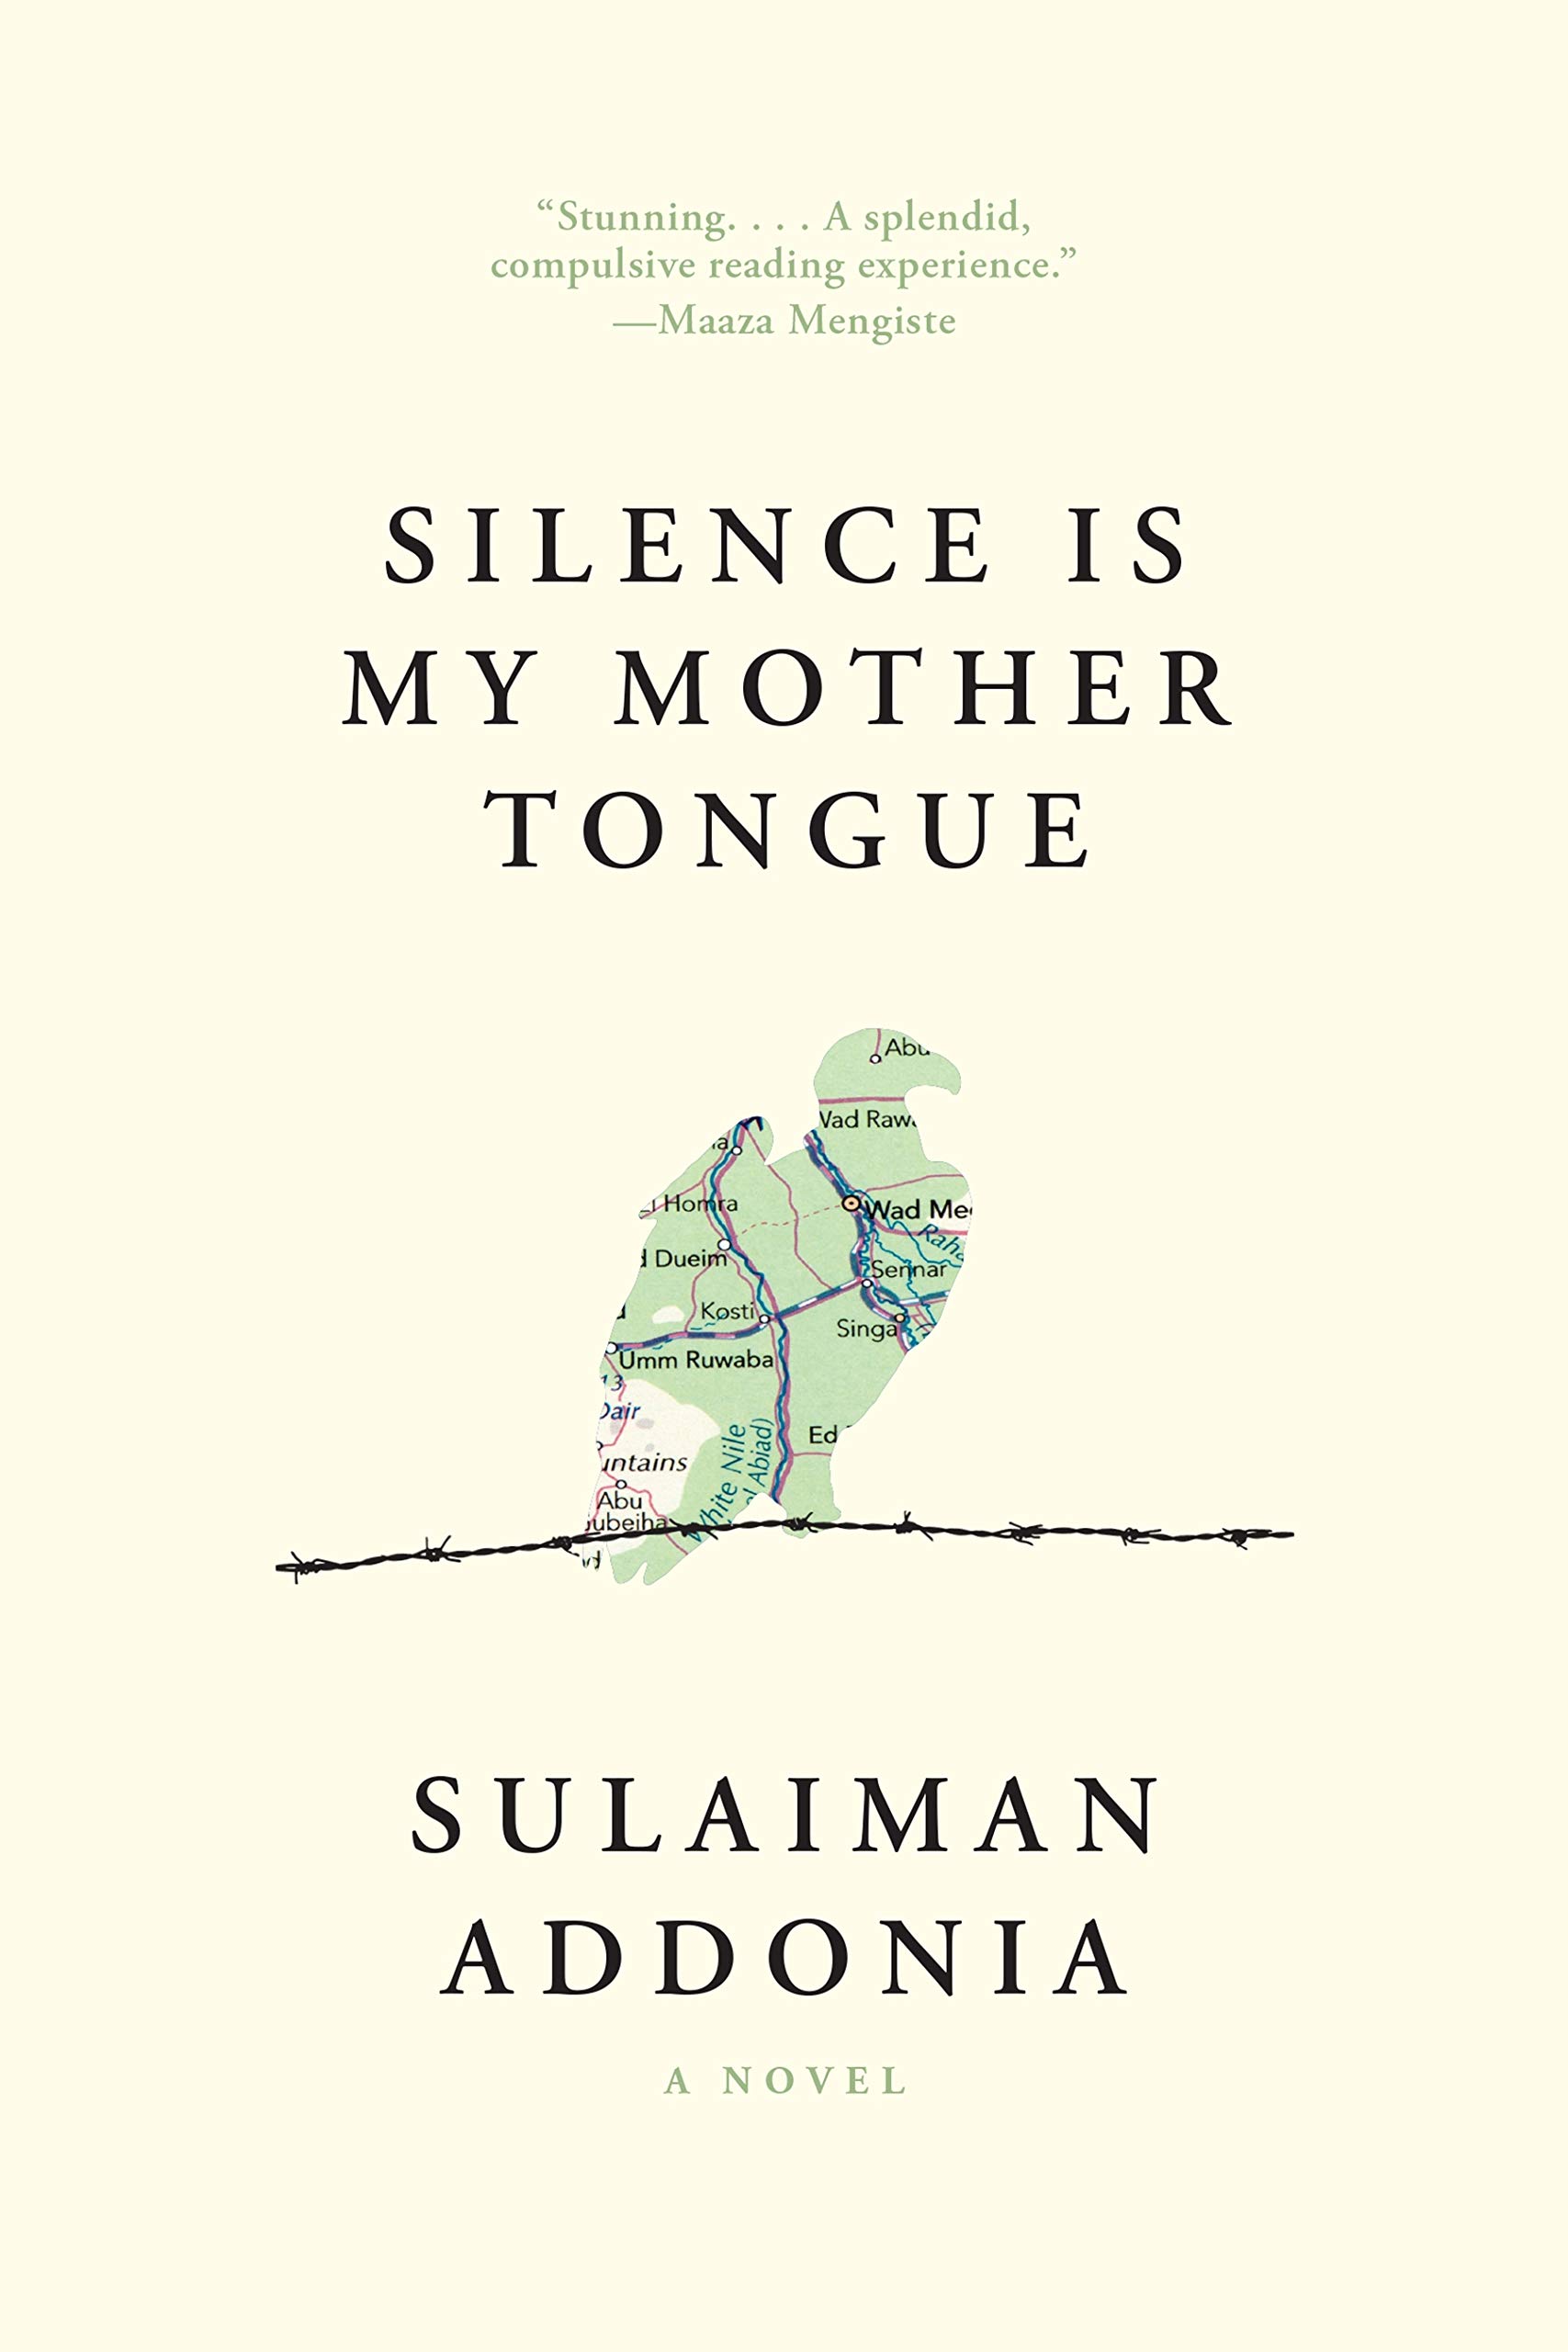 Silence Is My Mother Tongue